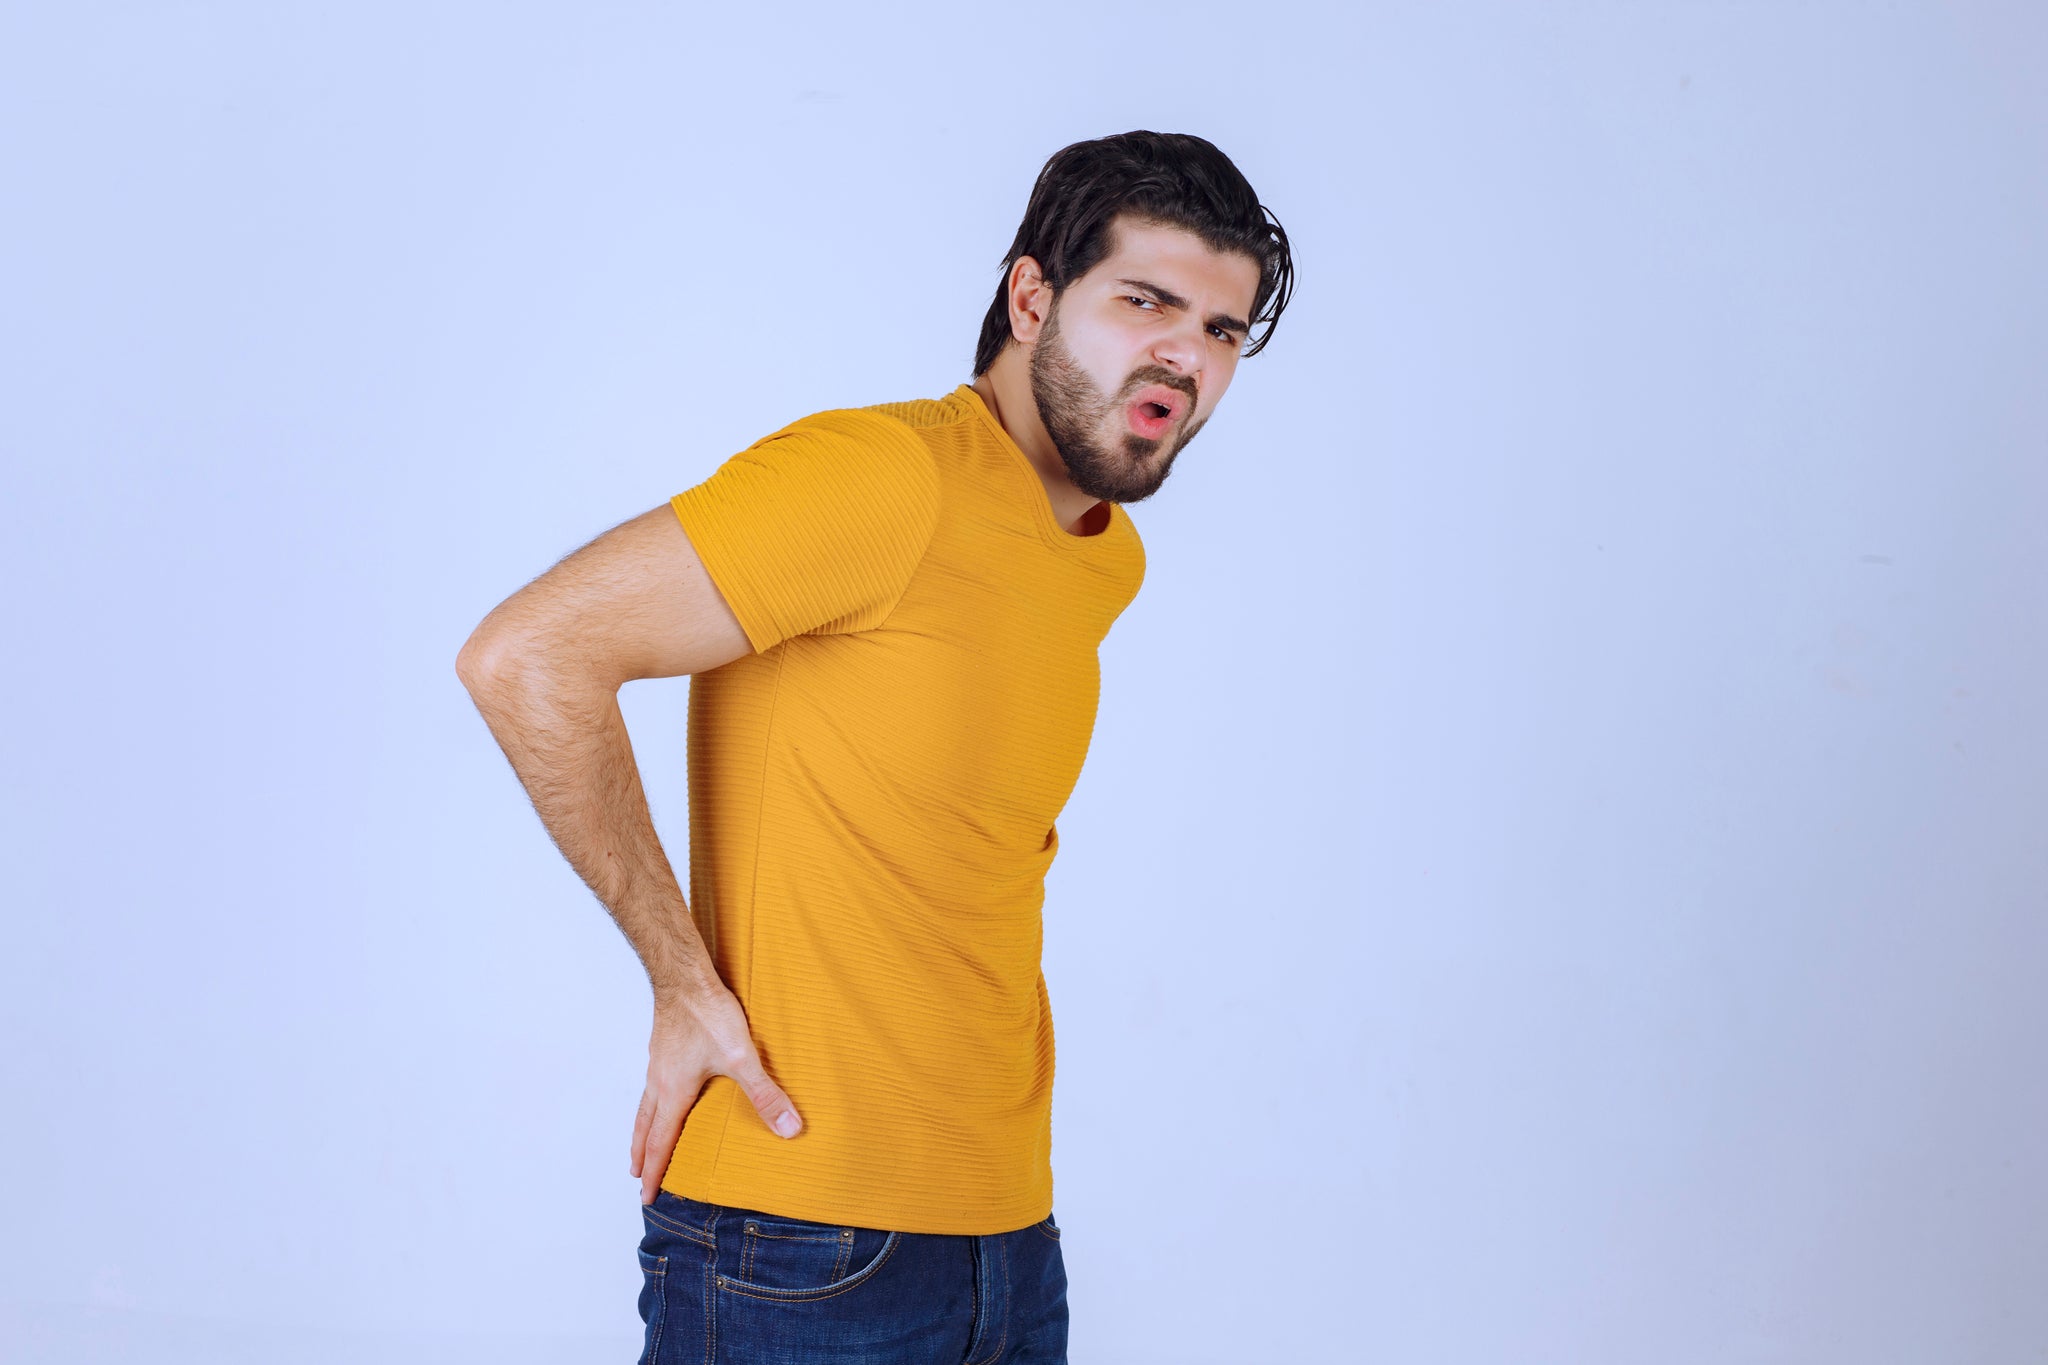 Home Remedies for Hemorrhoids